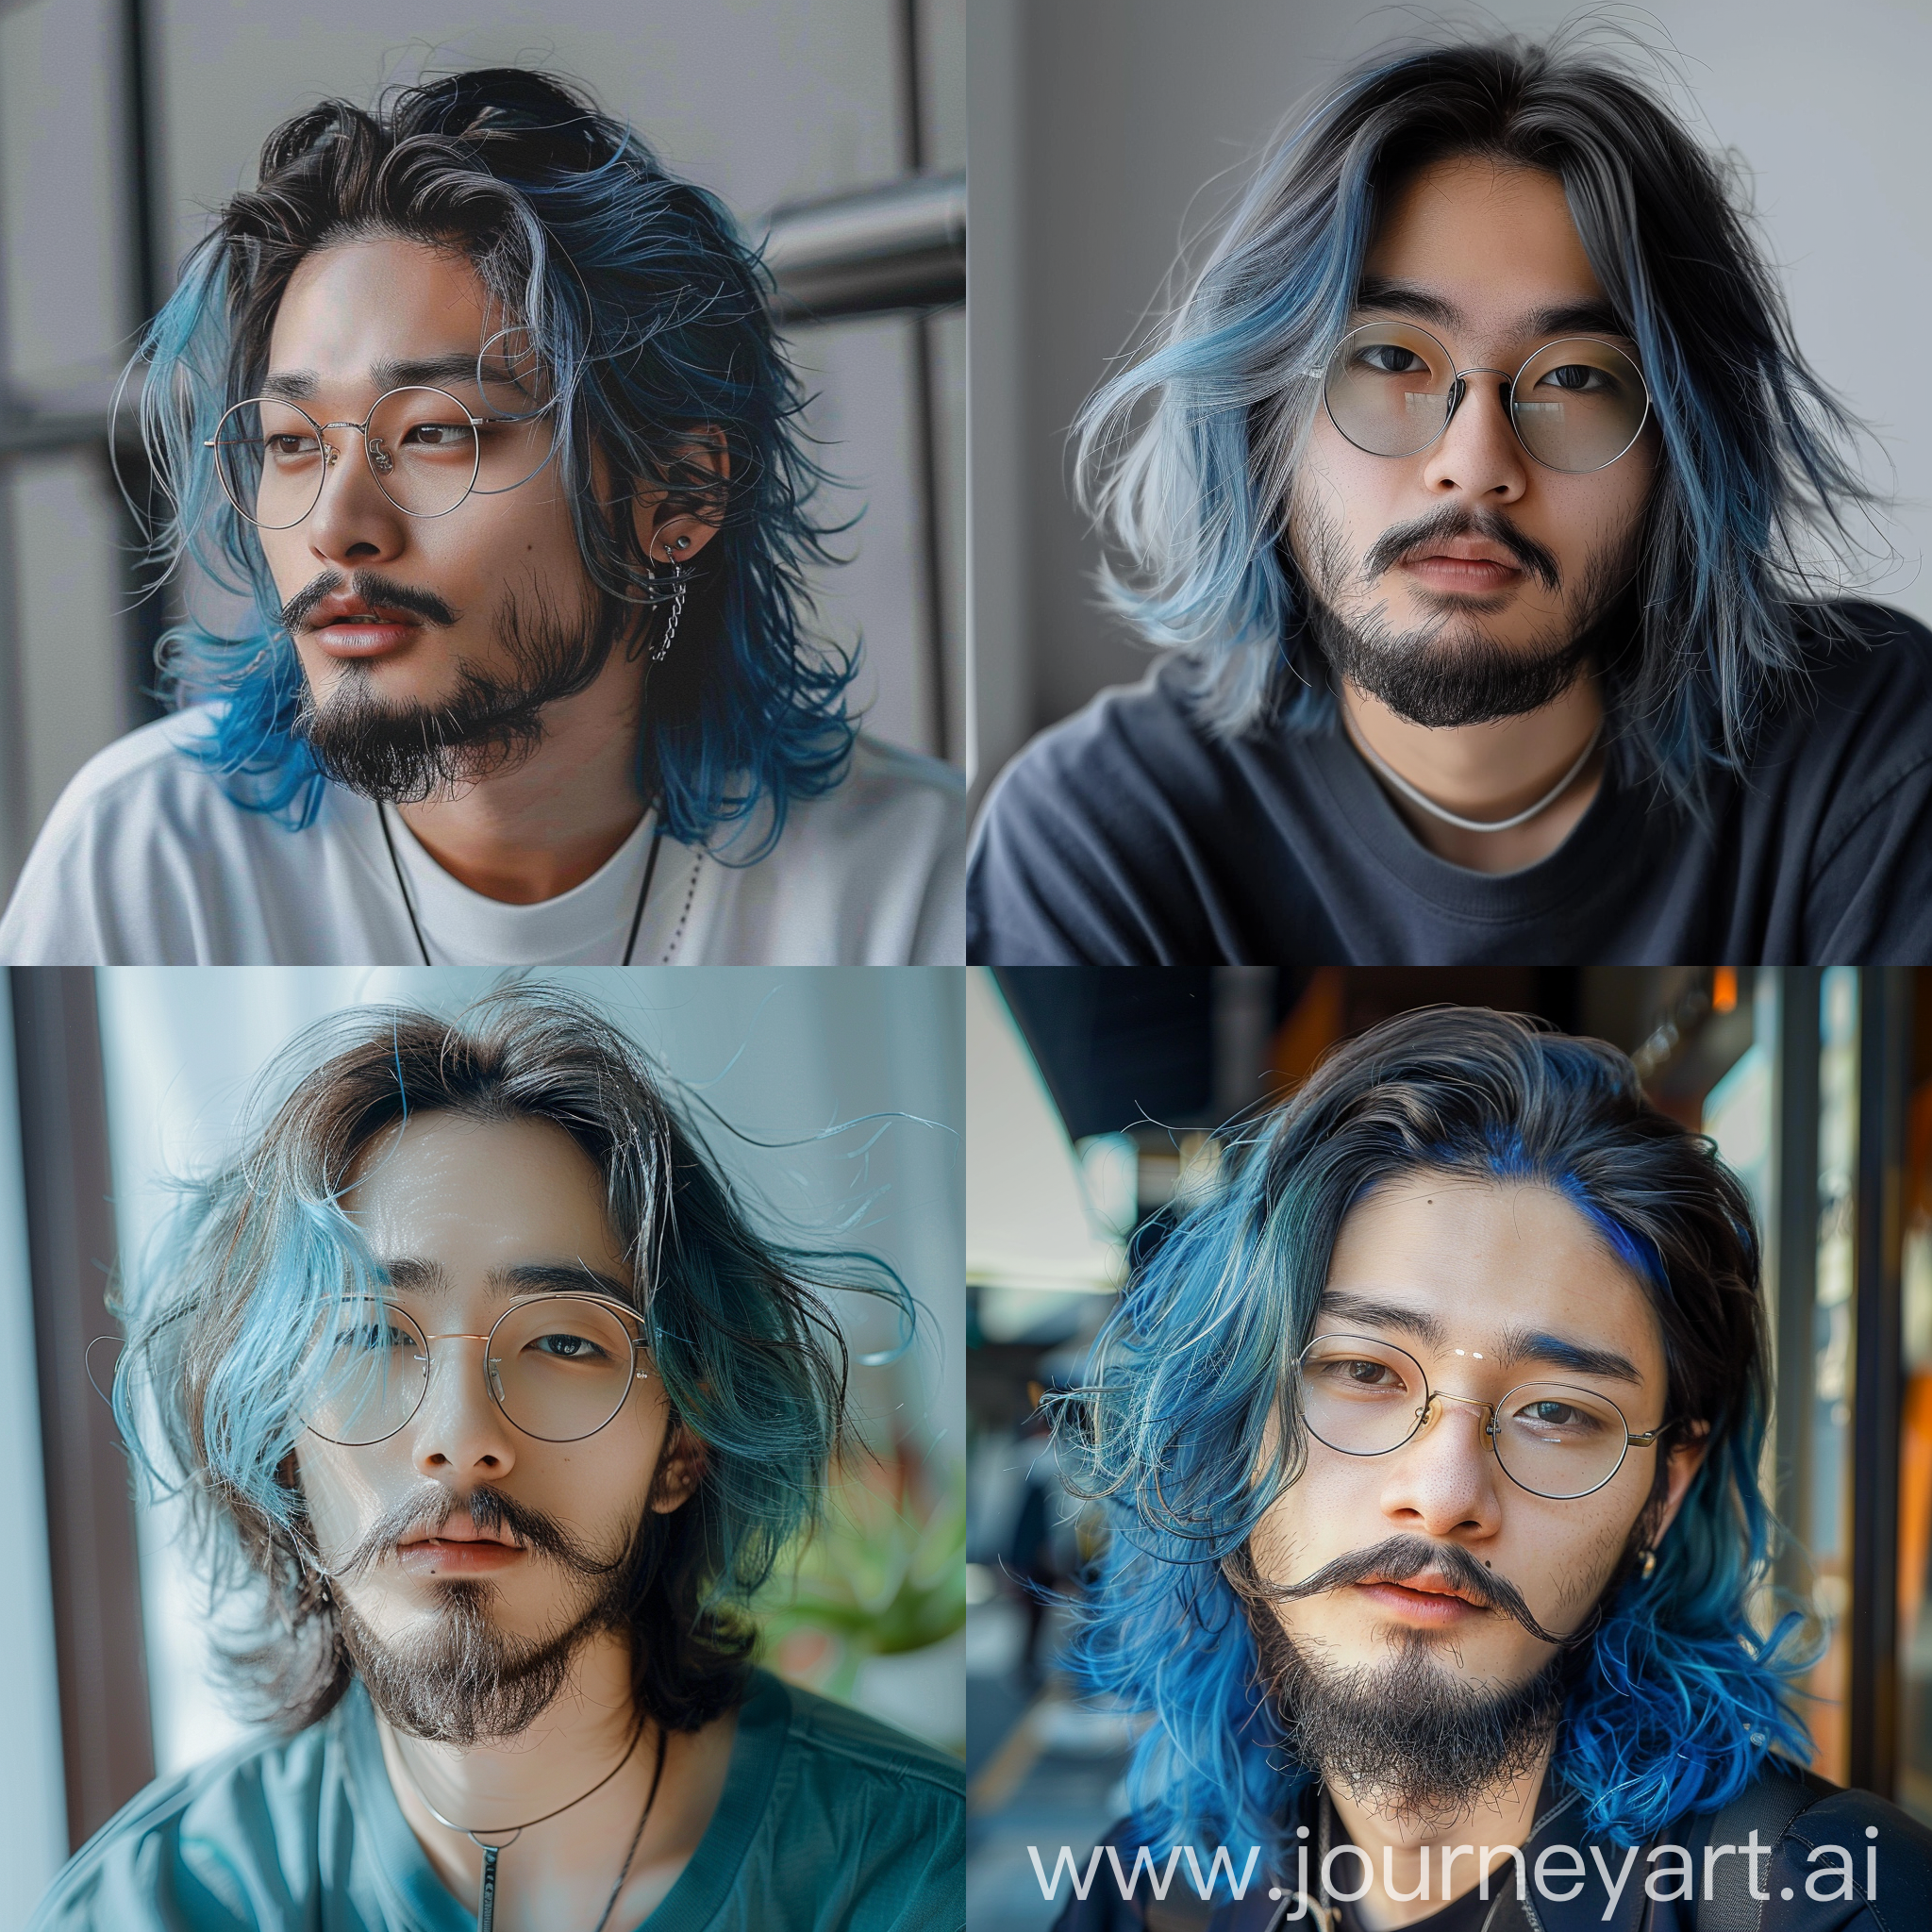 Generate a medium long hair Asian youth, hair slightly dyed blue, delicate and natural some, to the kind of luffian and do not know the temperament and wear glasses to have a beard, beard is not too thick, there is a feeling of literary